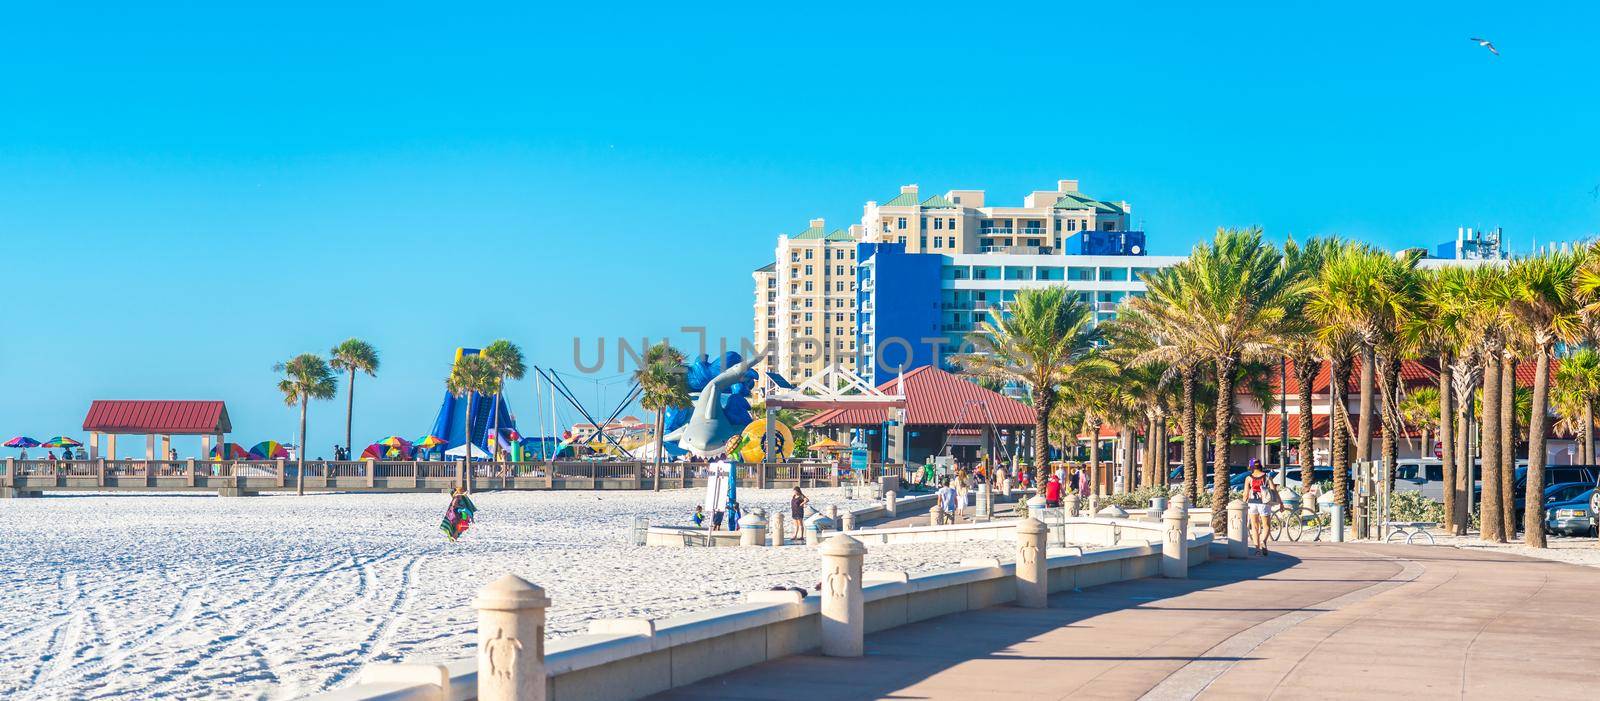 Clearwater beach with beautiful white sand in Florida USA by Mariakray